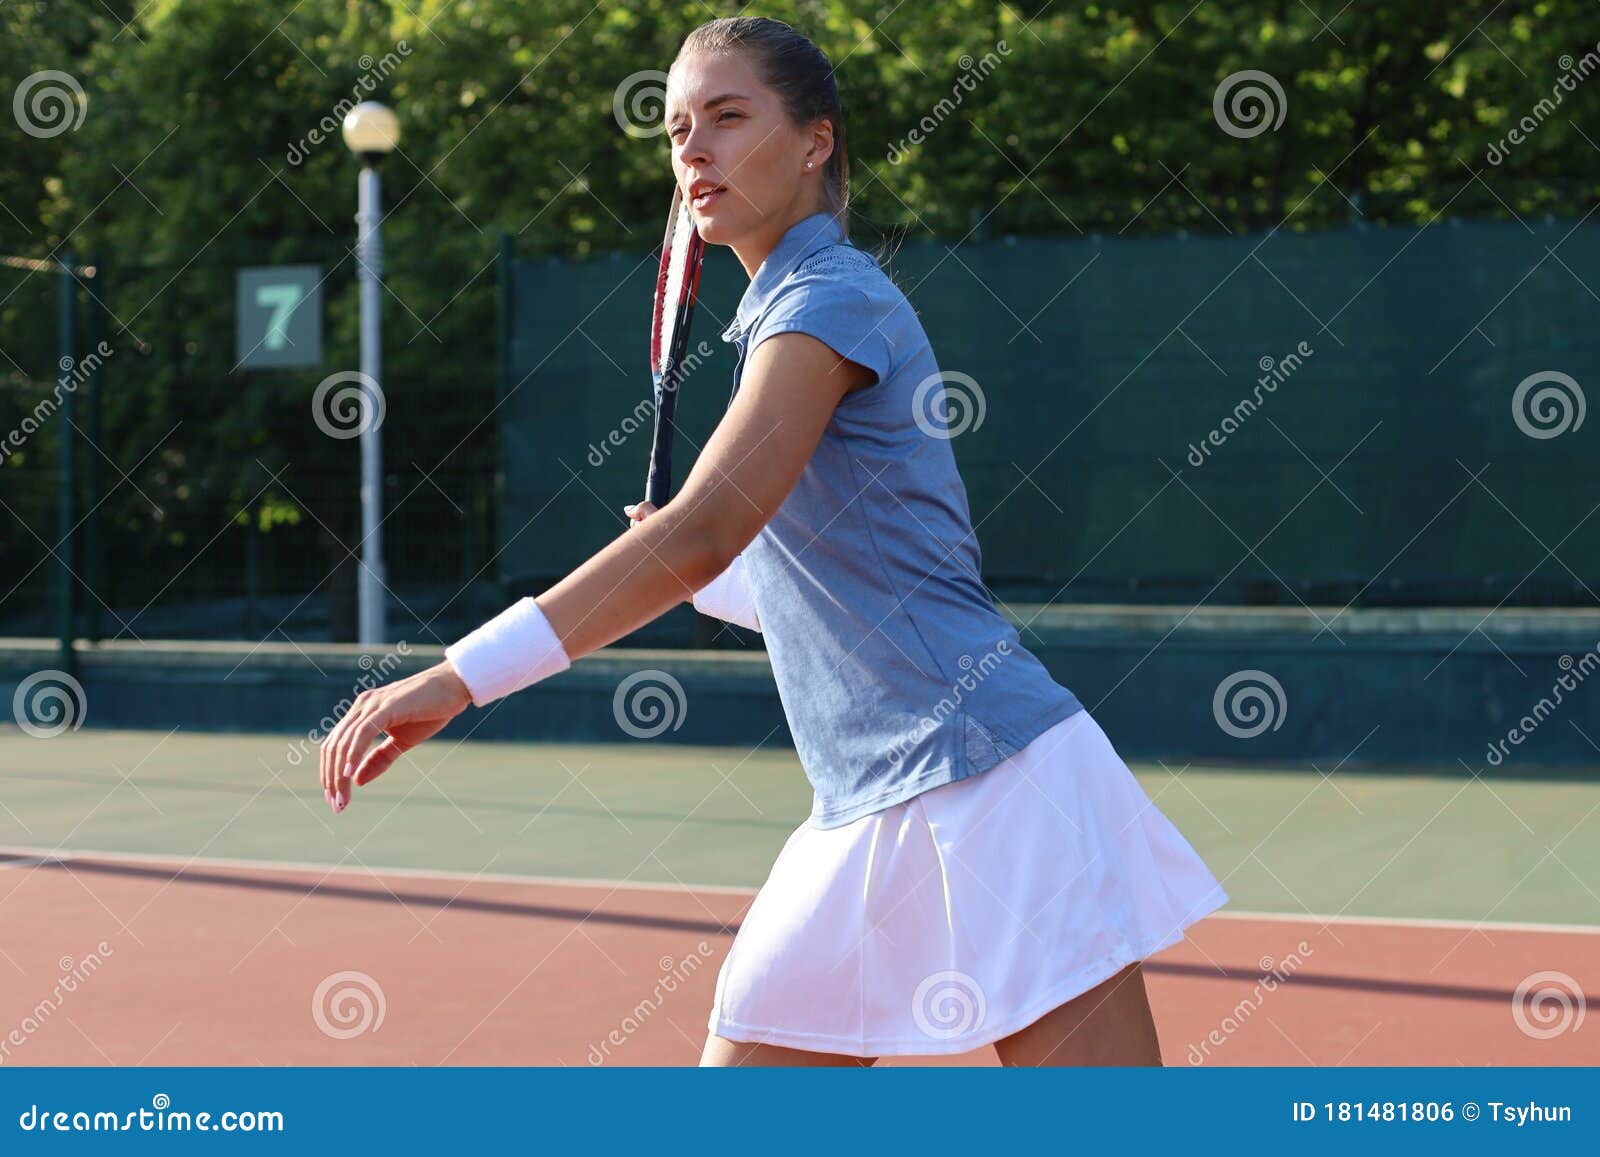 Professional Equipped Female Tennis Player Beating Hard The Tennis Ball With Racquet Its Good